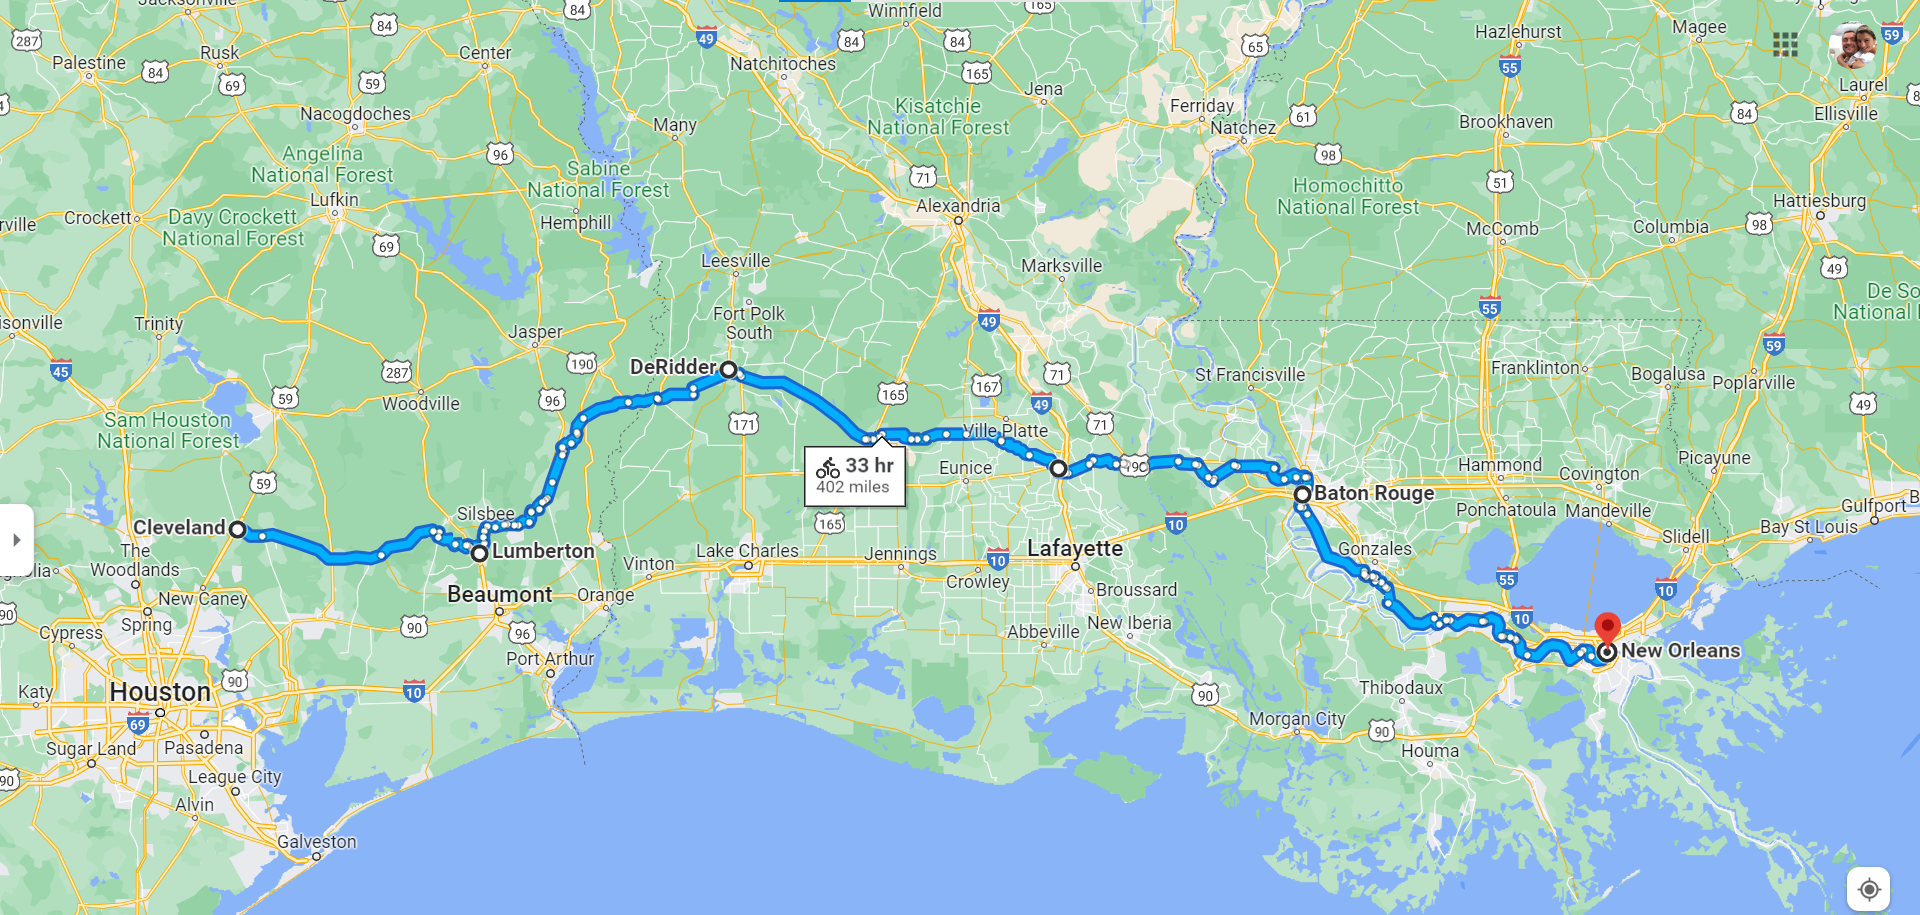 Cleveland to New Orleans (original plan)